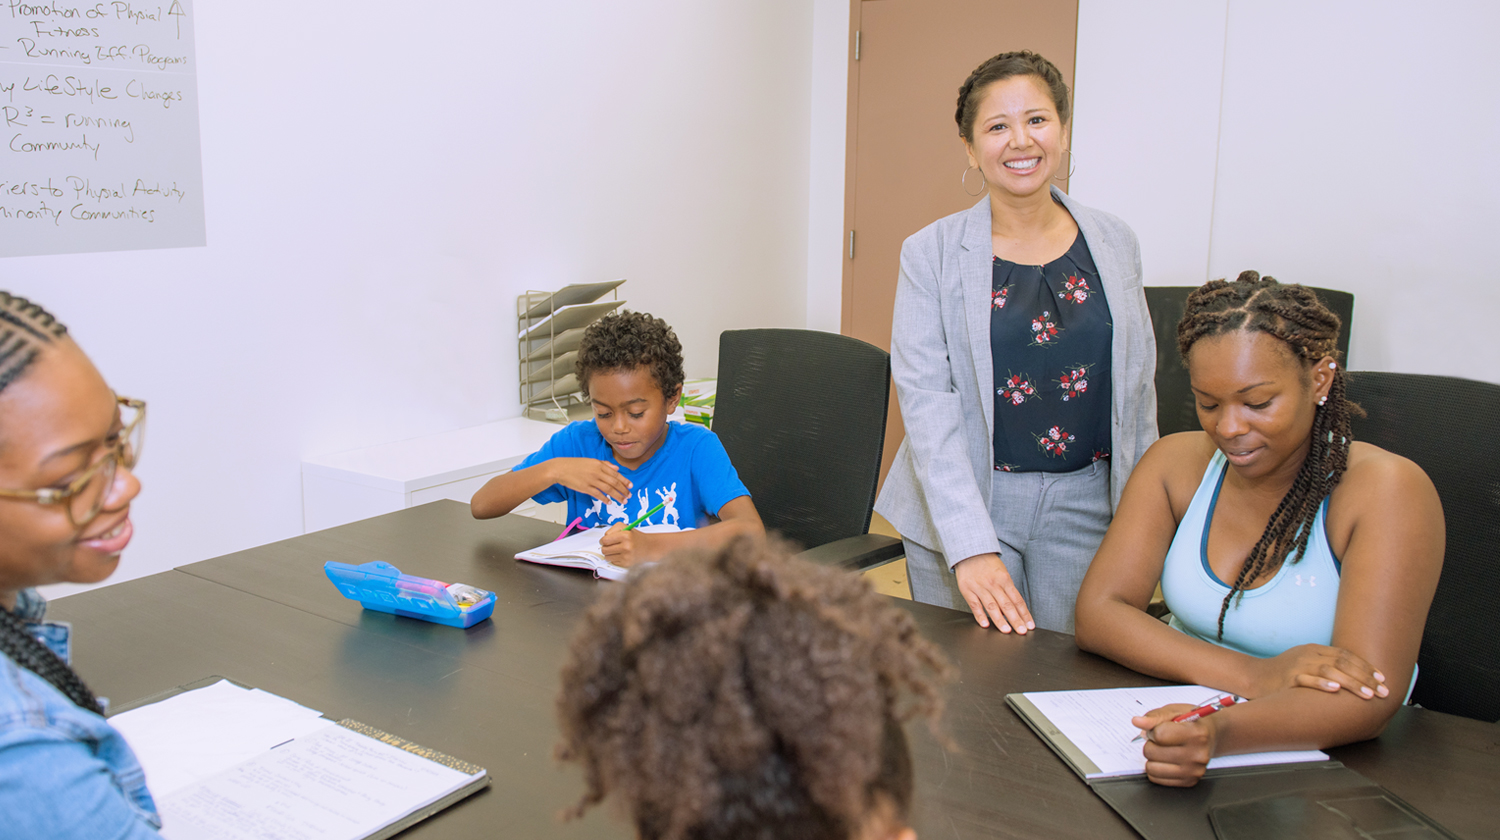 Katy Pinto, the 2019 Presidential Outstanding Professor Award recipient, works with students and their children in the Social Problems Research Laboratory. 